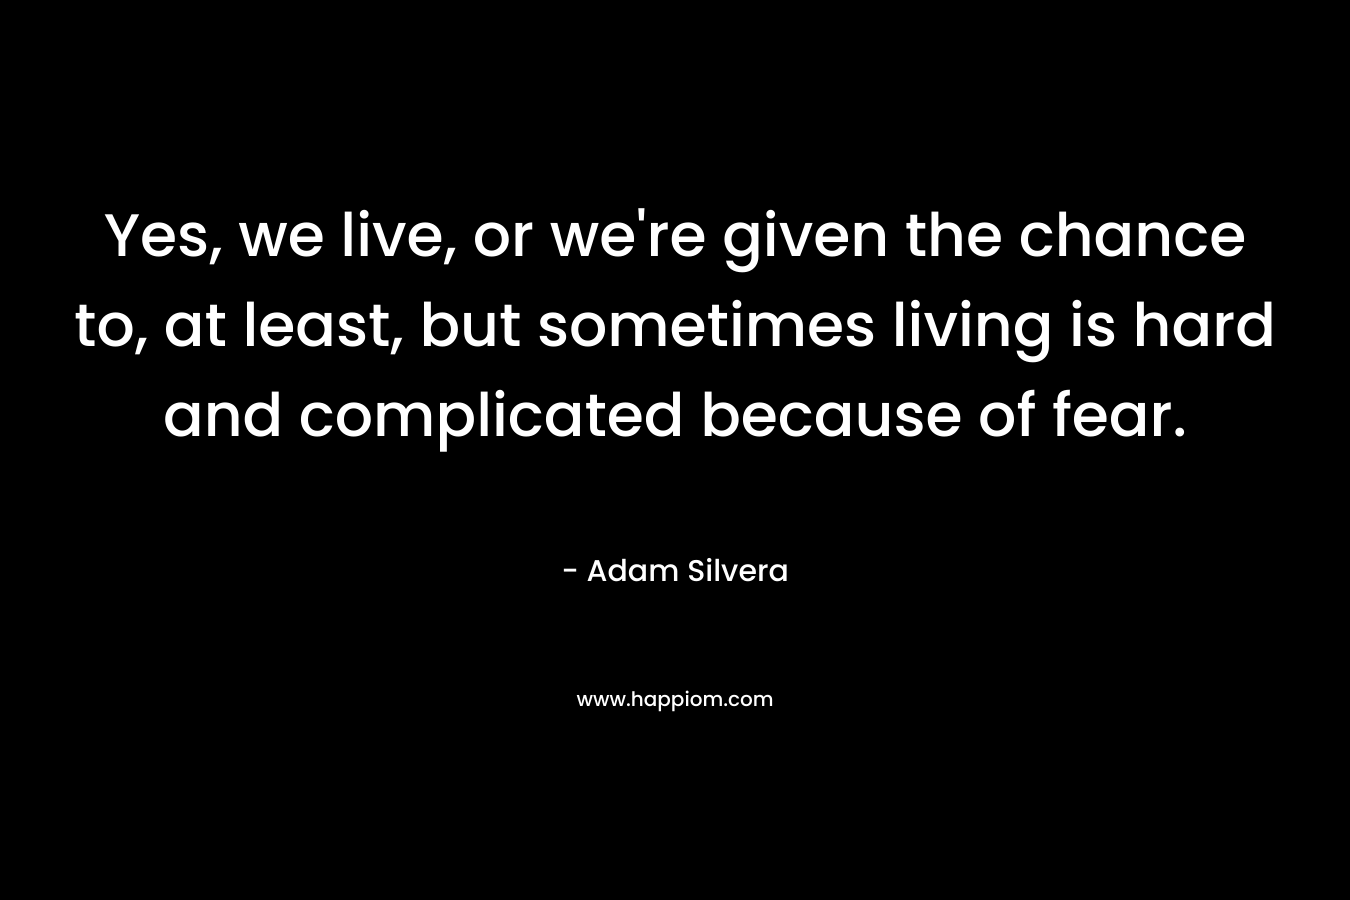 Yes, we live, or we’re given the chance to, at least, but sometimes living is hard and complicated because of fear. – Adam Silvera